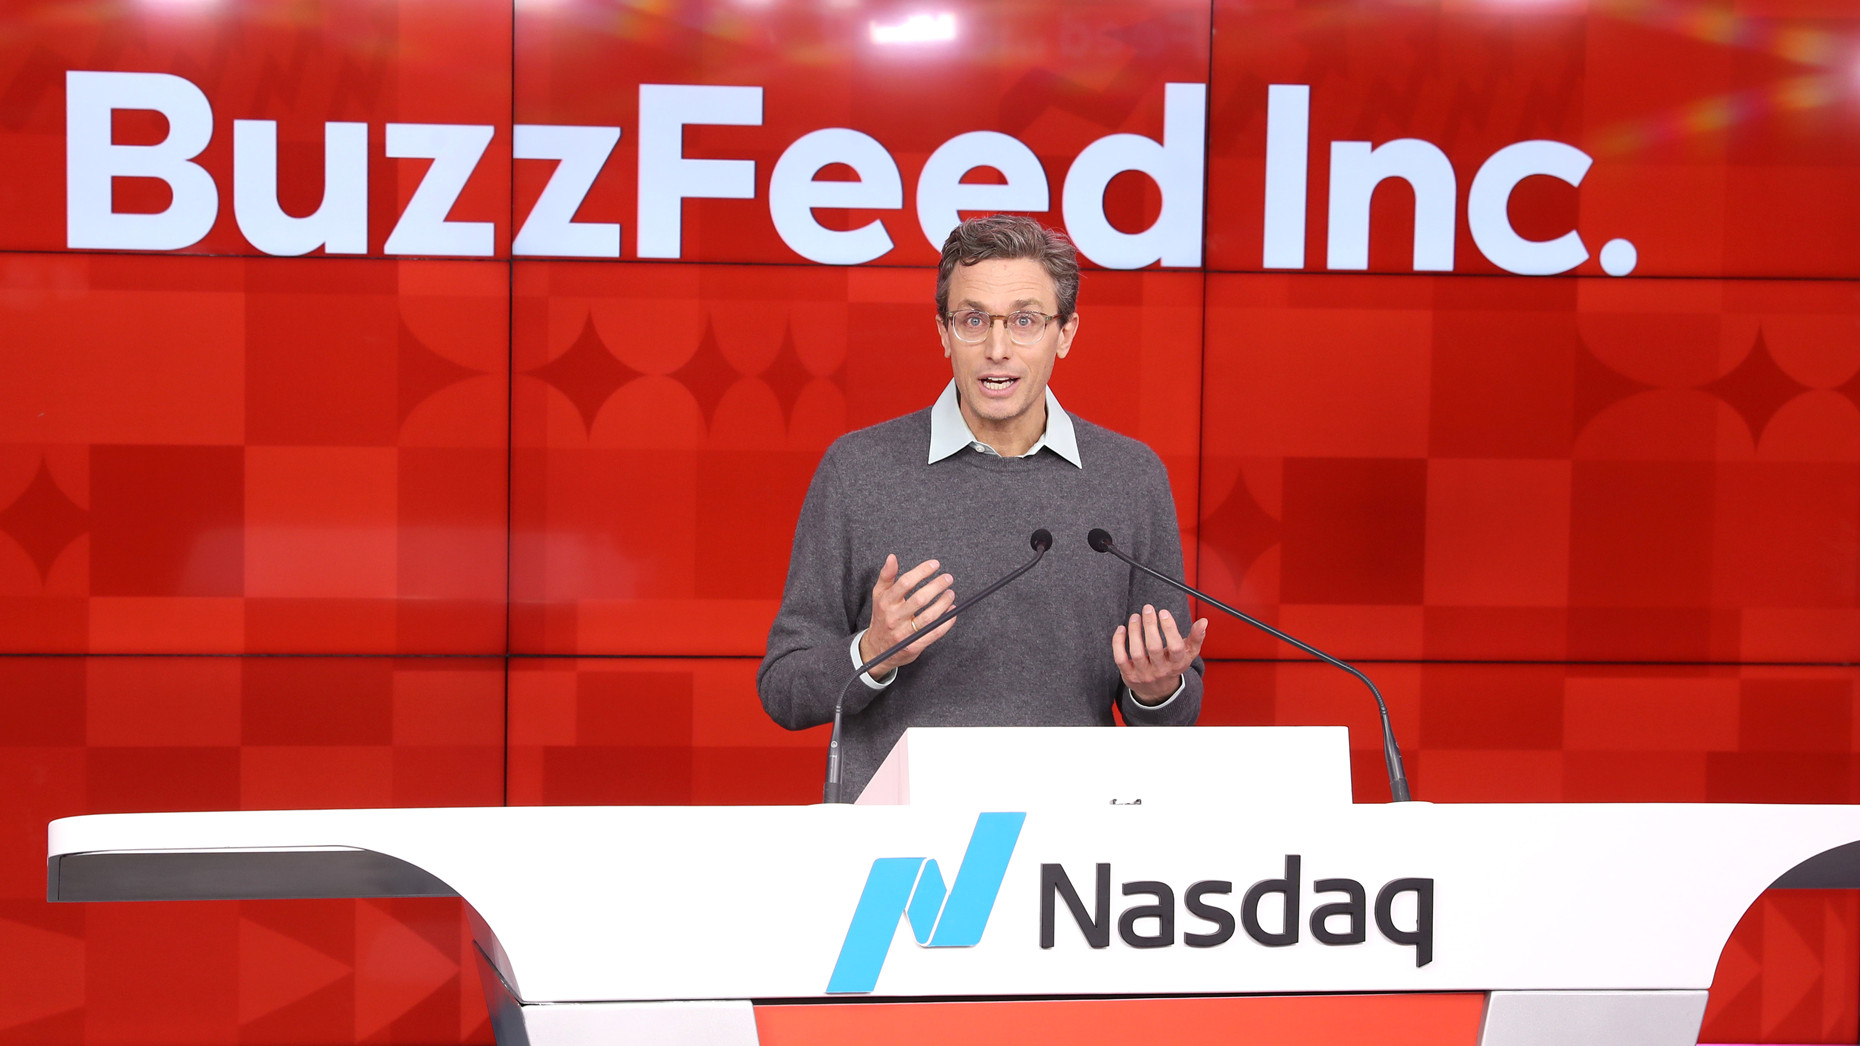 Buzzfeed's Financial Struggle Deepens With Complex Networks Sale Falling Short